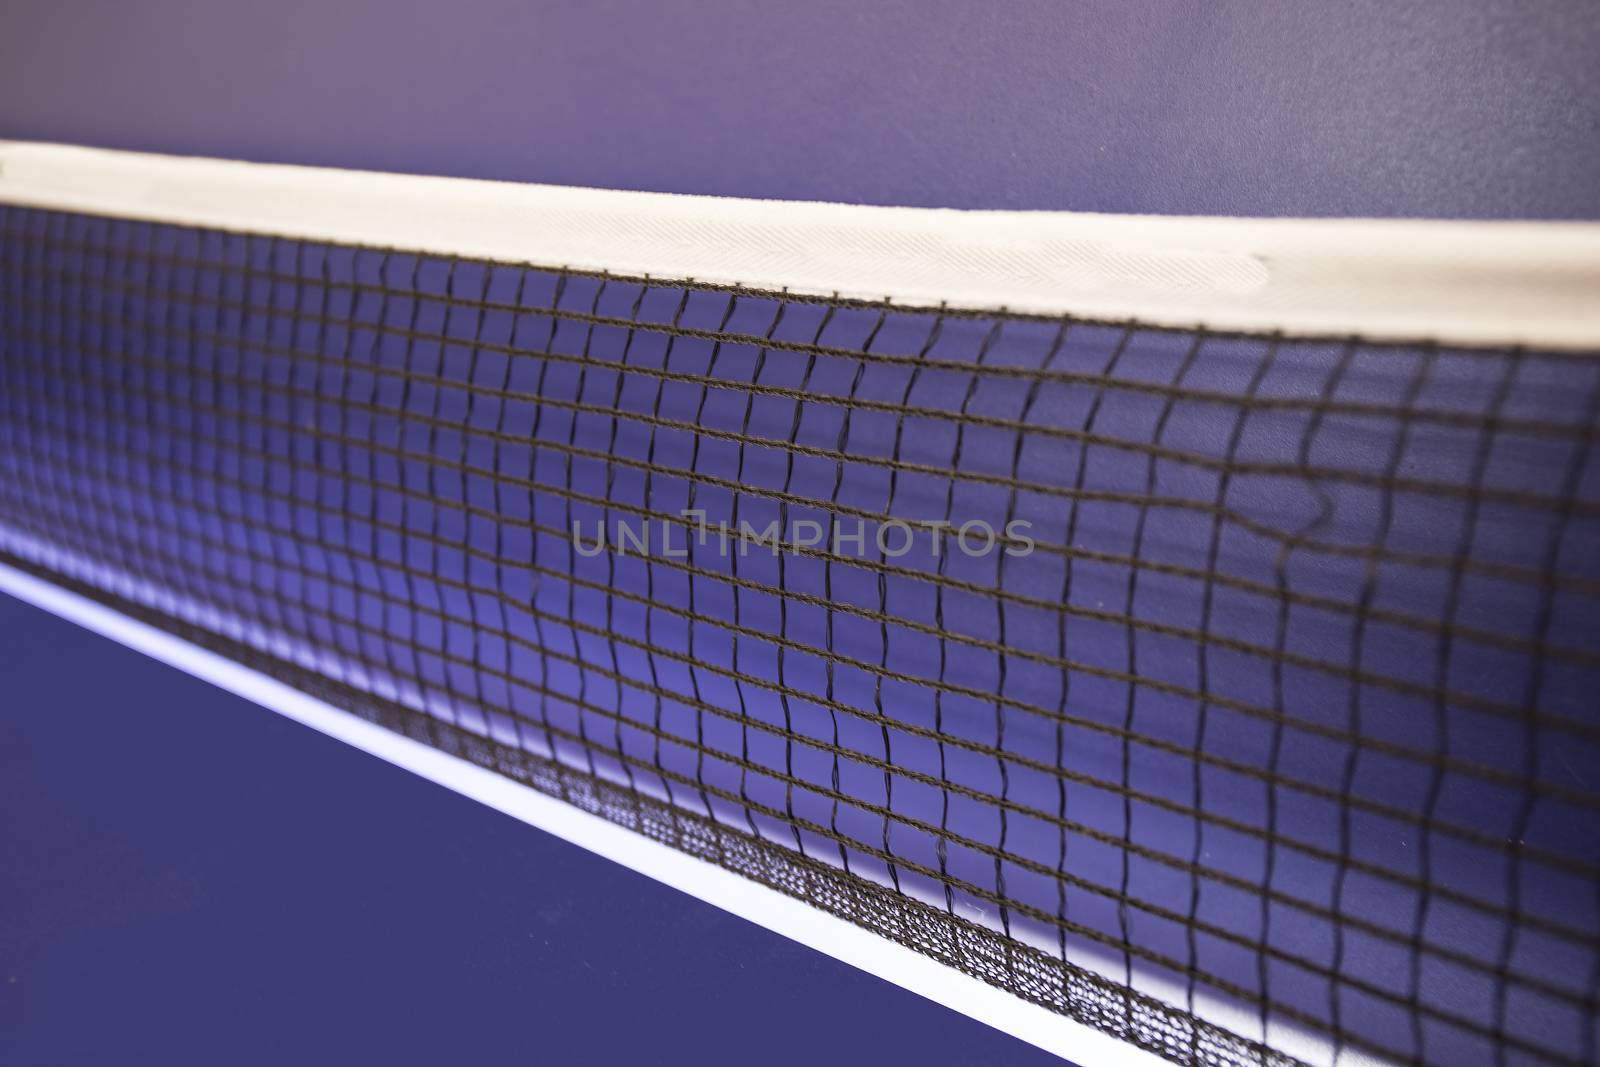 Ping pong net in a blue table by nachrc2001